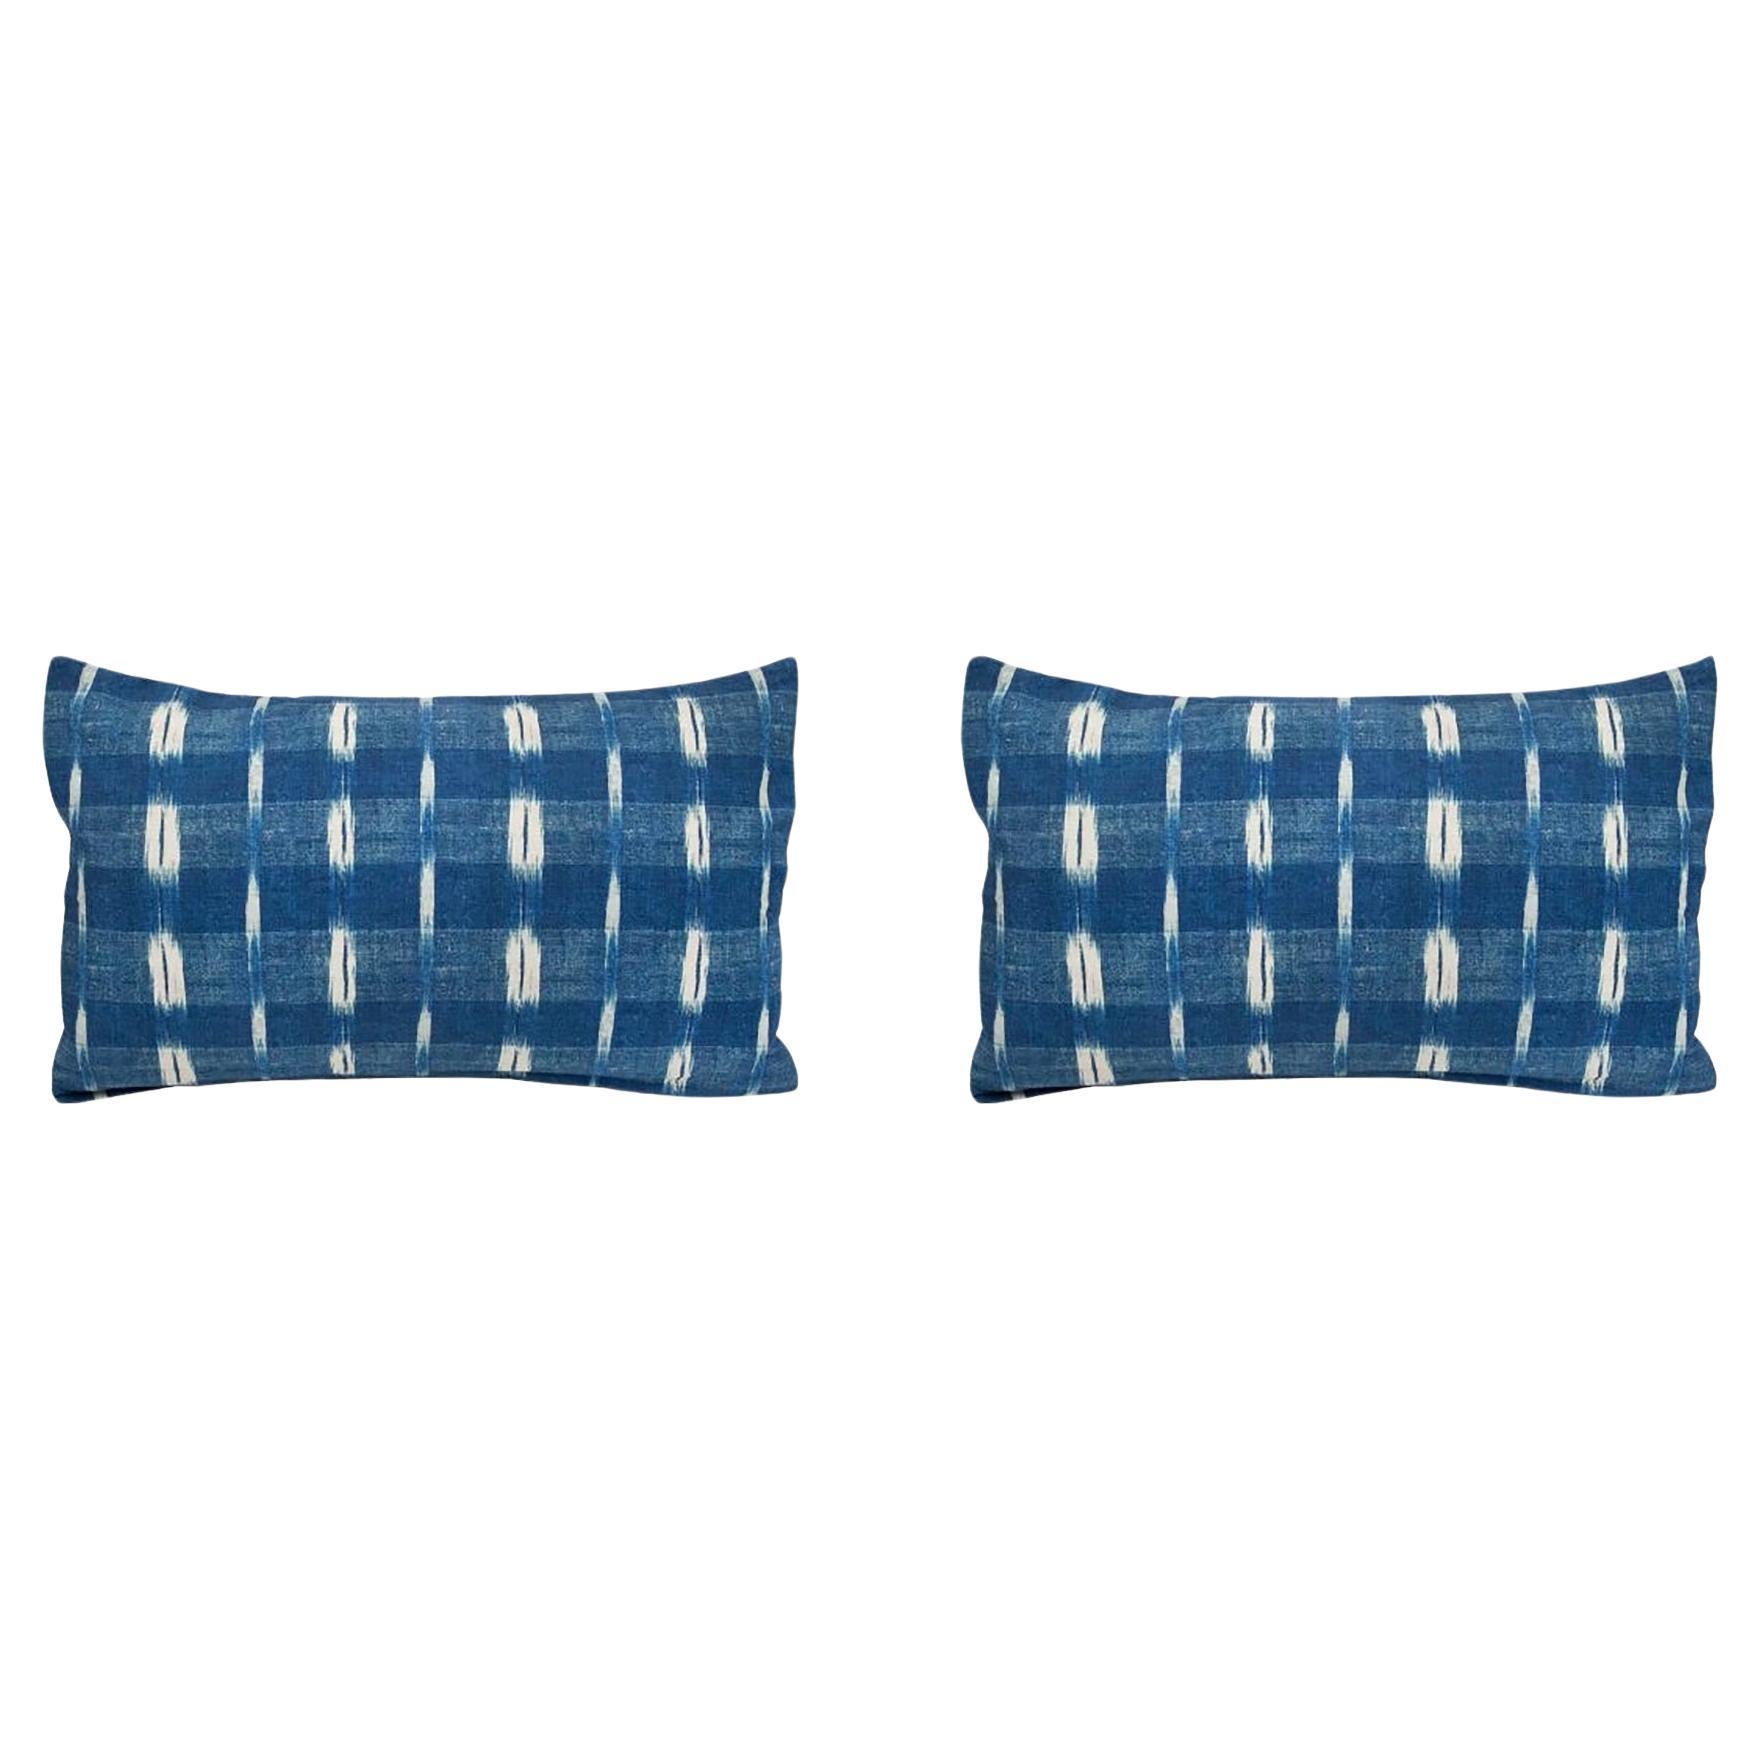 Pair of Large Linen Pillow Cushions - Flamme Indigo pattern - Made in Paris For Sale